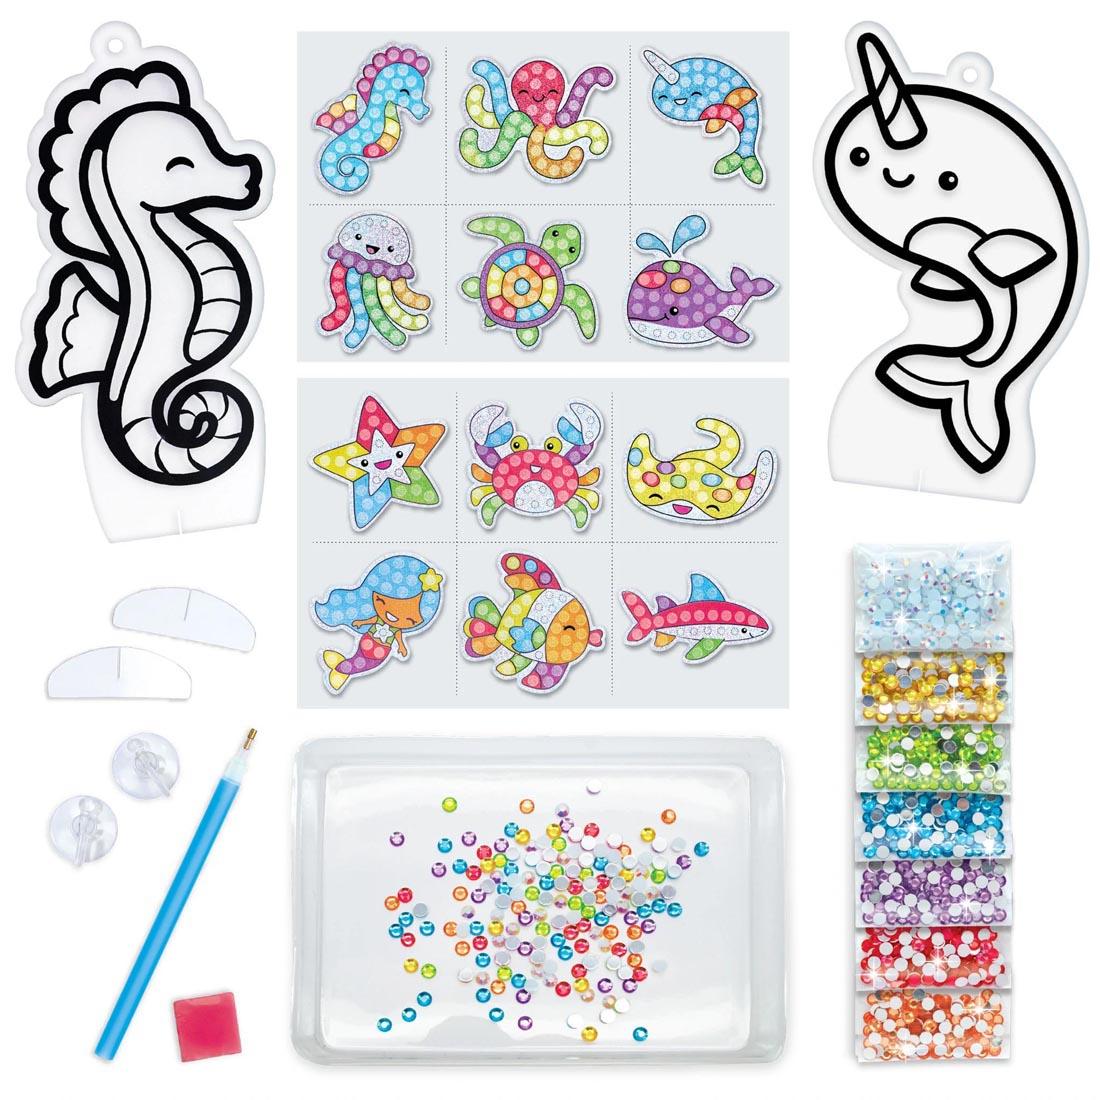 Contents of Big Gem Diamond Painting Sea Friends Kit By Creativity For Kids